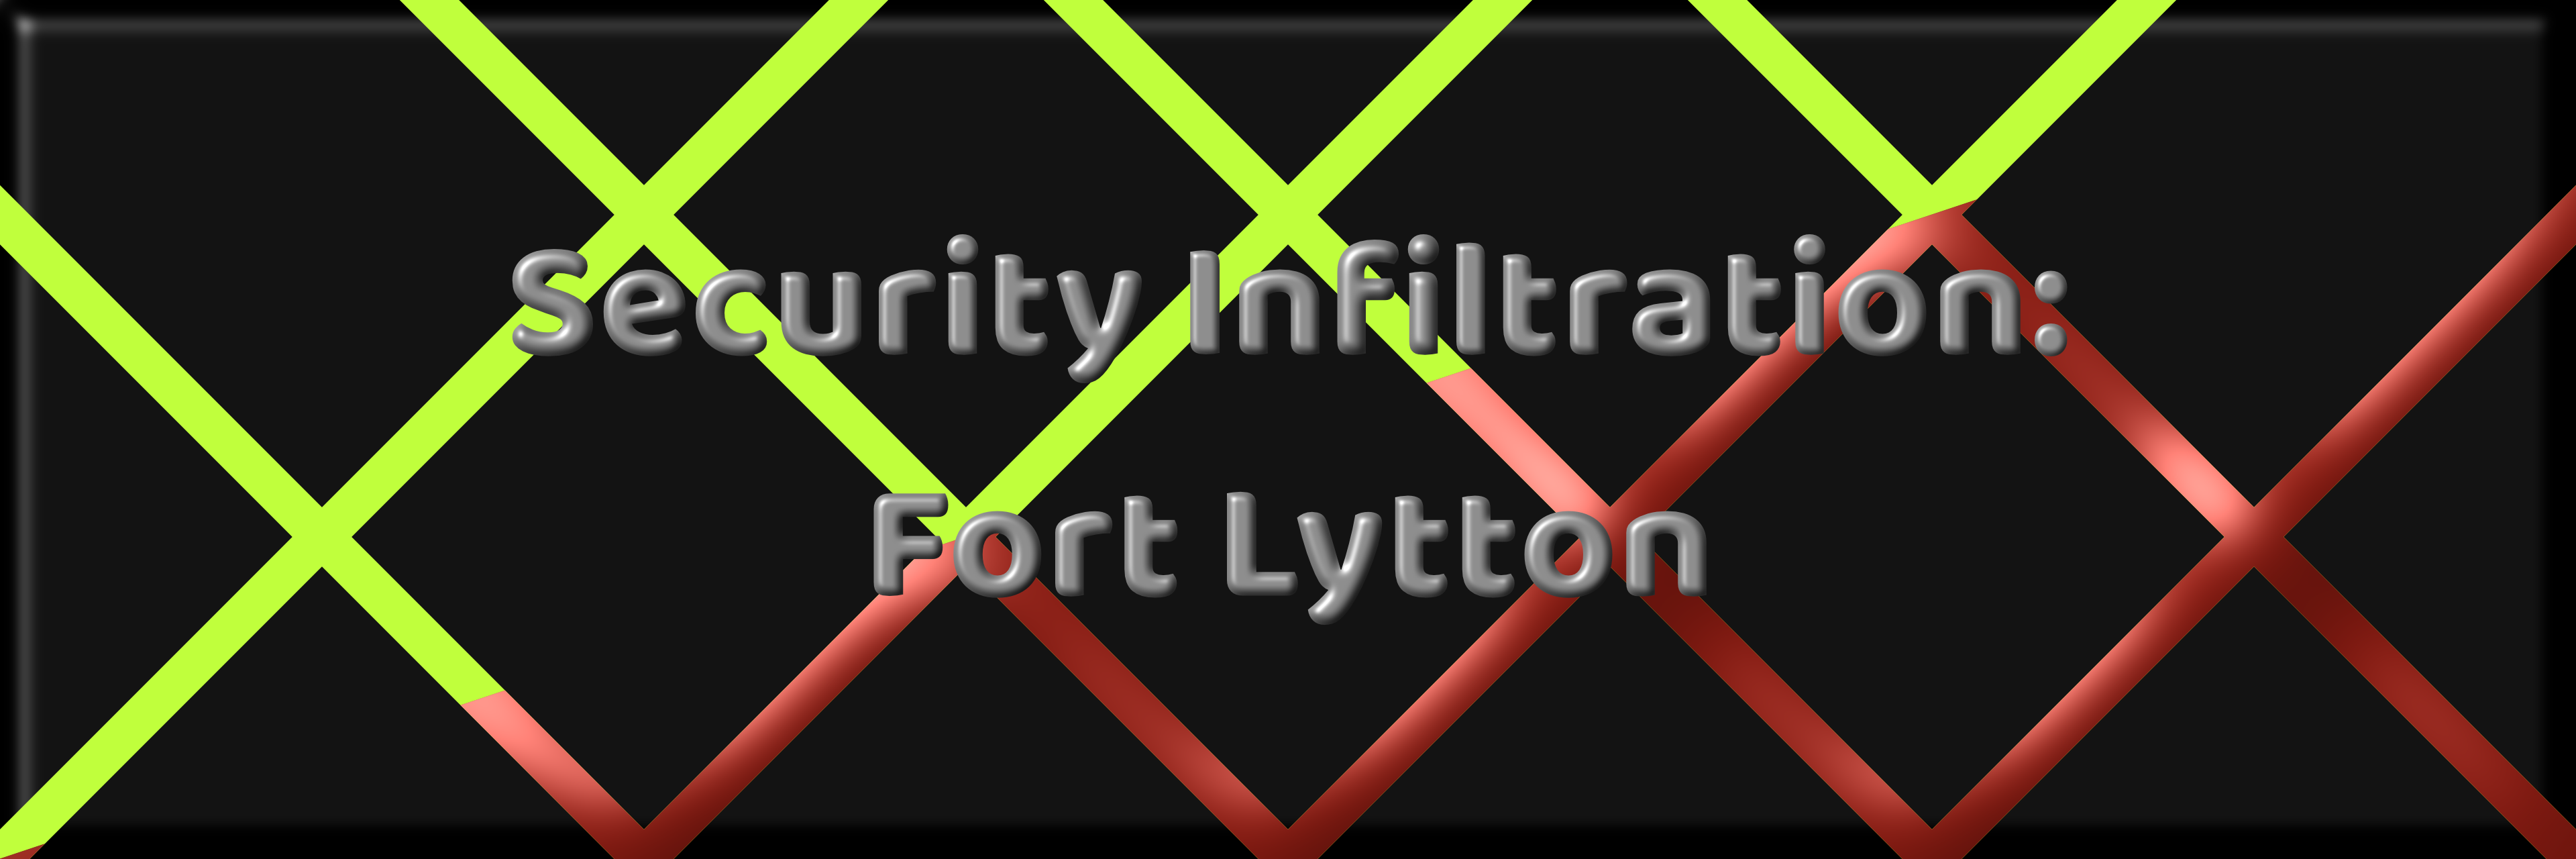 Secuirty Infiltration: Fort Lytton